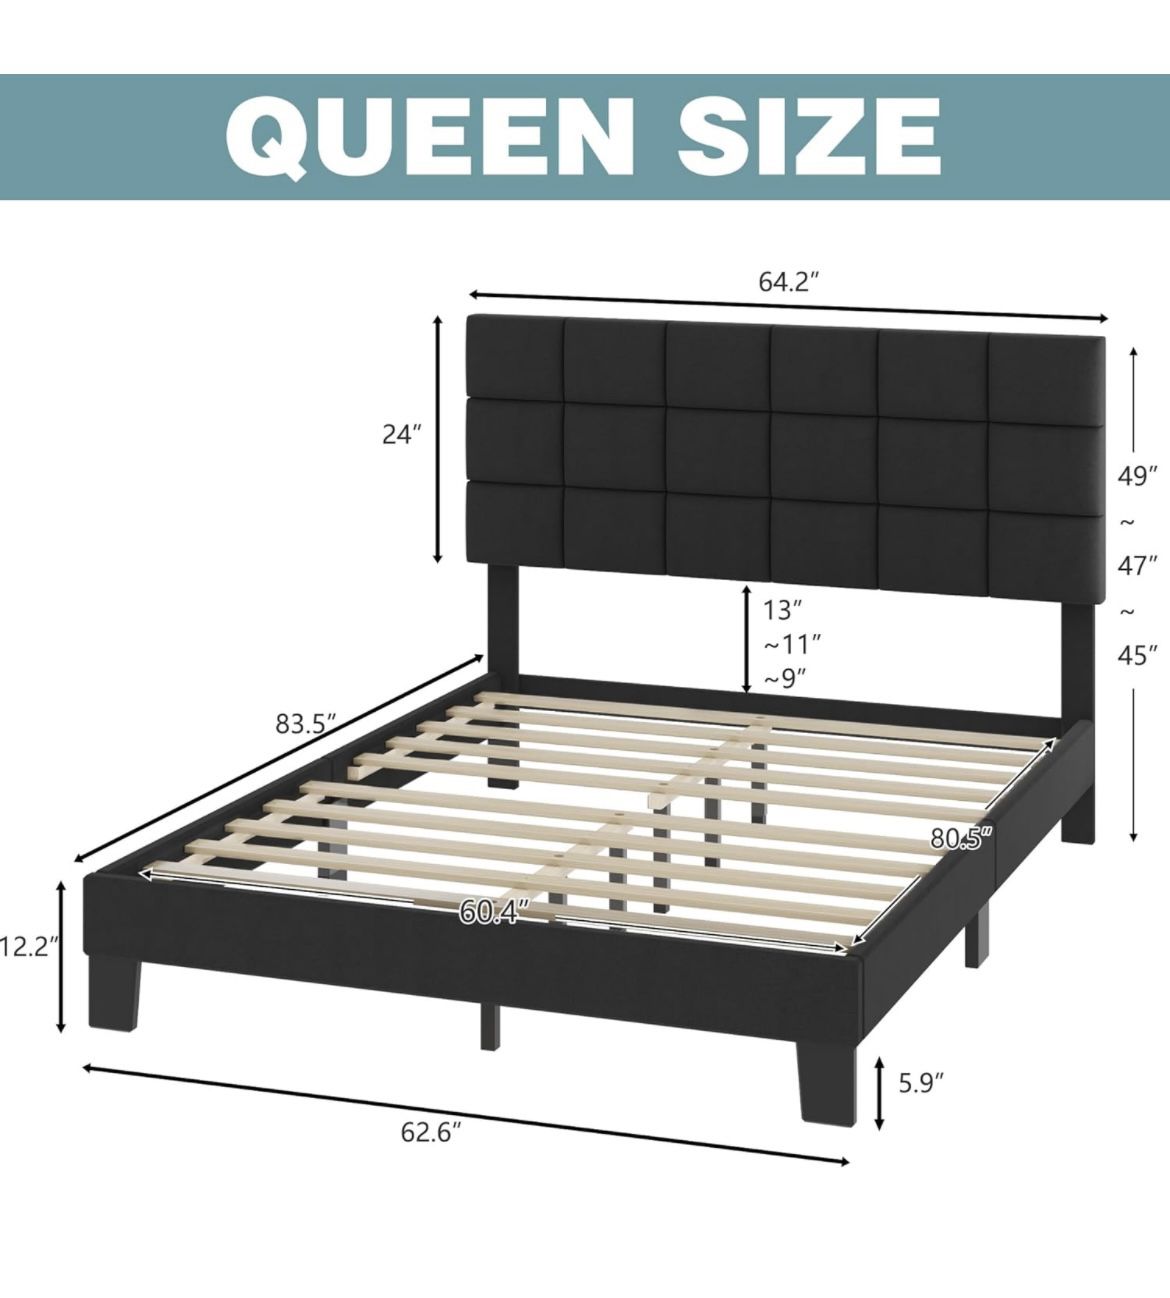 New Queen Size Bed Frame For Sale